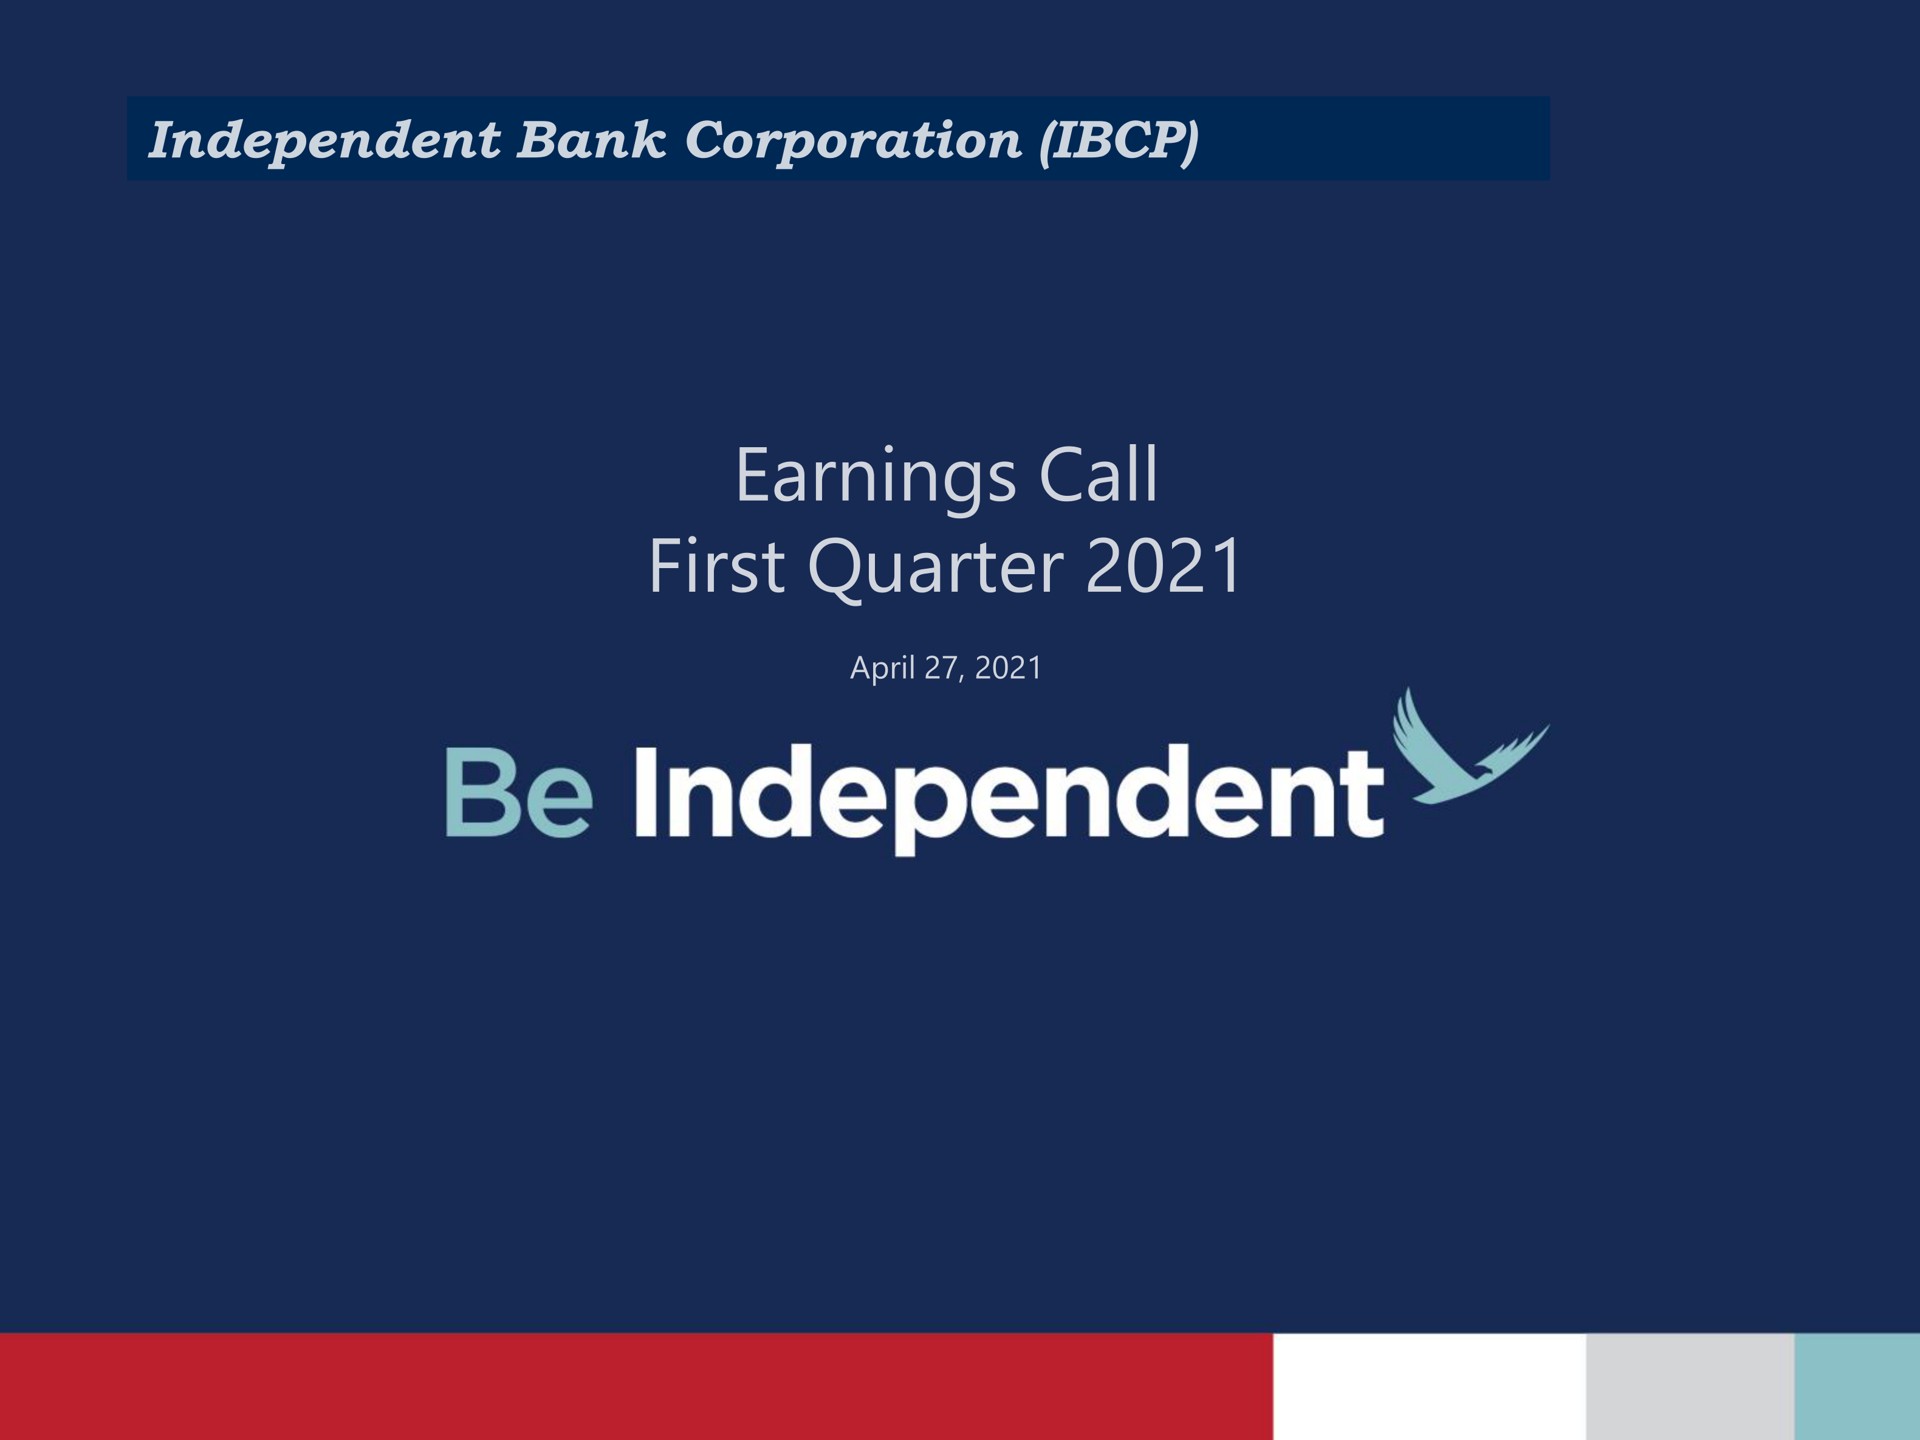 independent bank corporation earnings call first quarter be independent | Independent Bank Corp